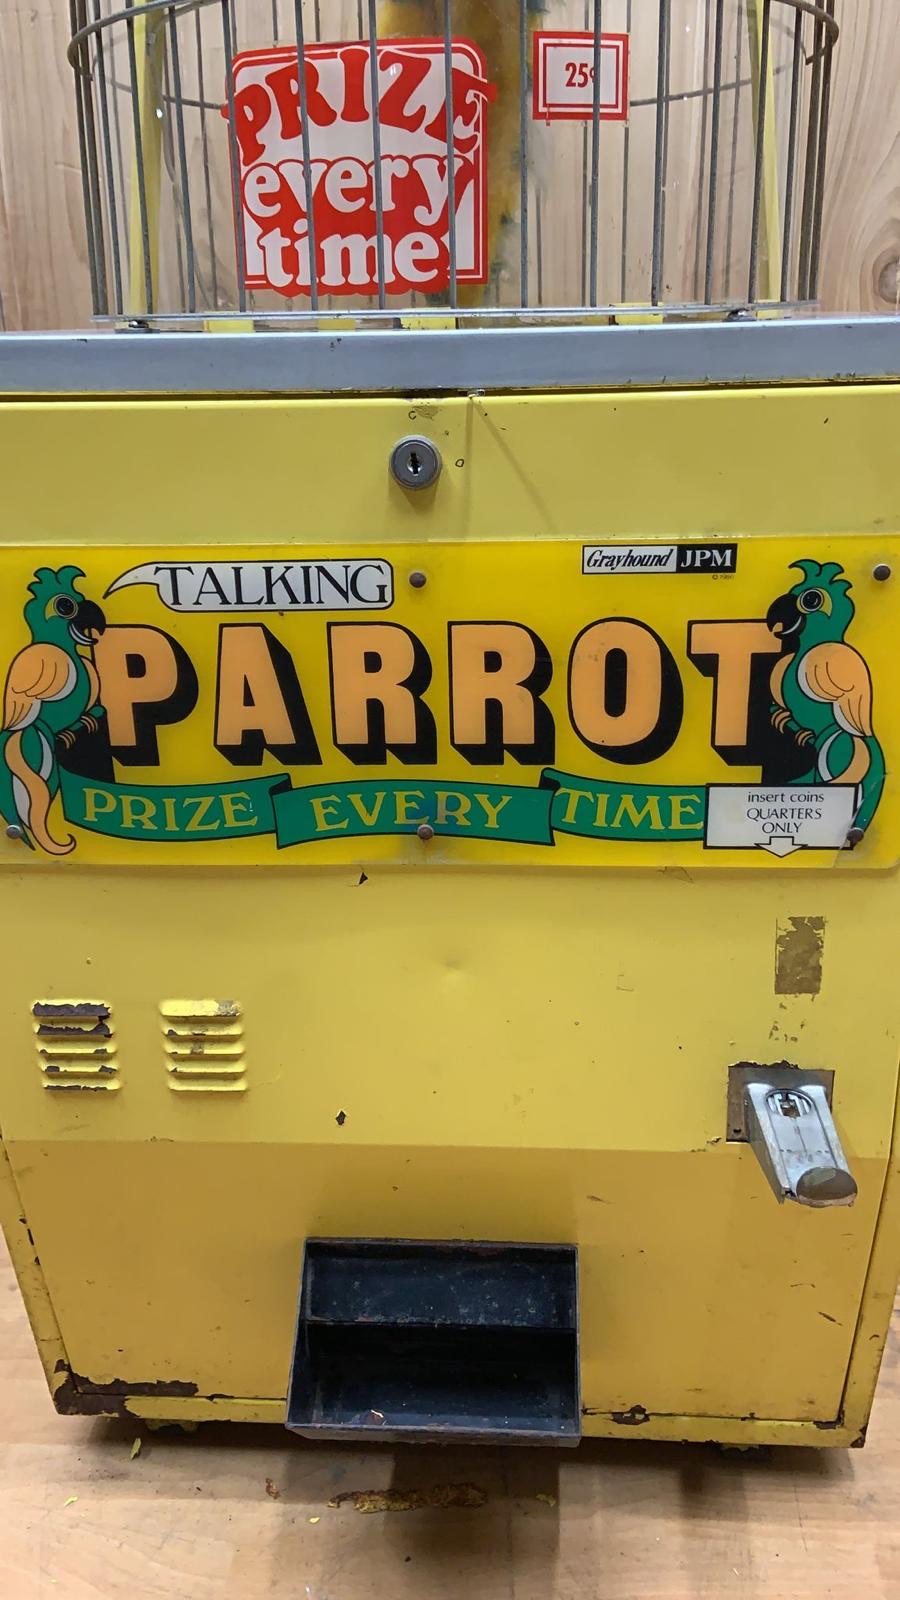 Gray Hound (JPM) 25 Cent Talking Parrot “Prize Every Time” Vending Machine